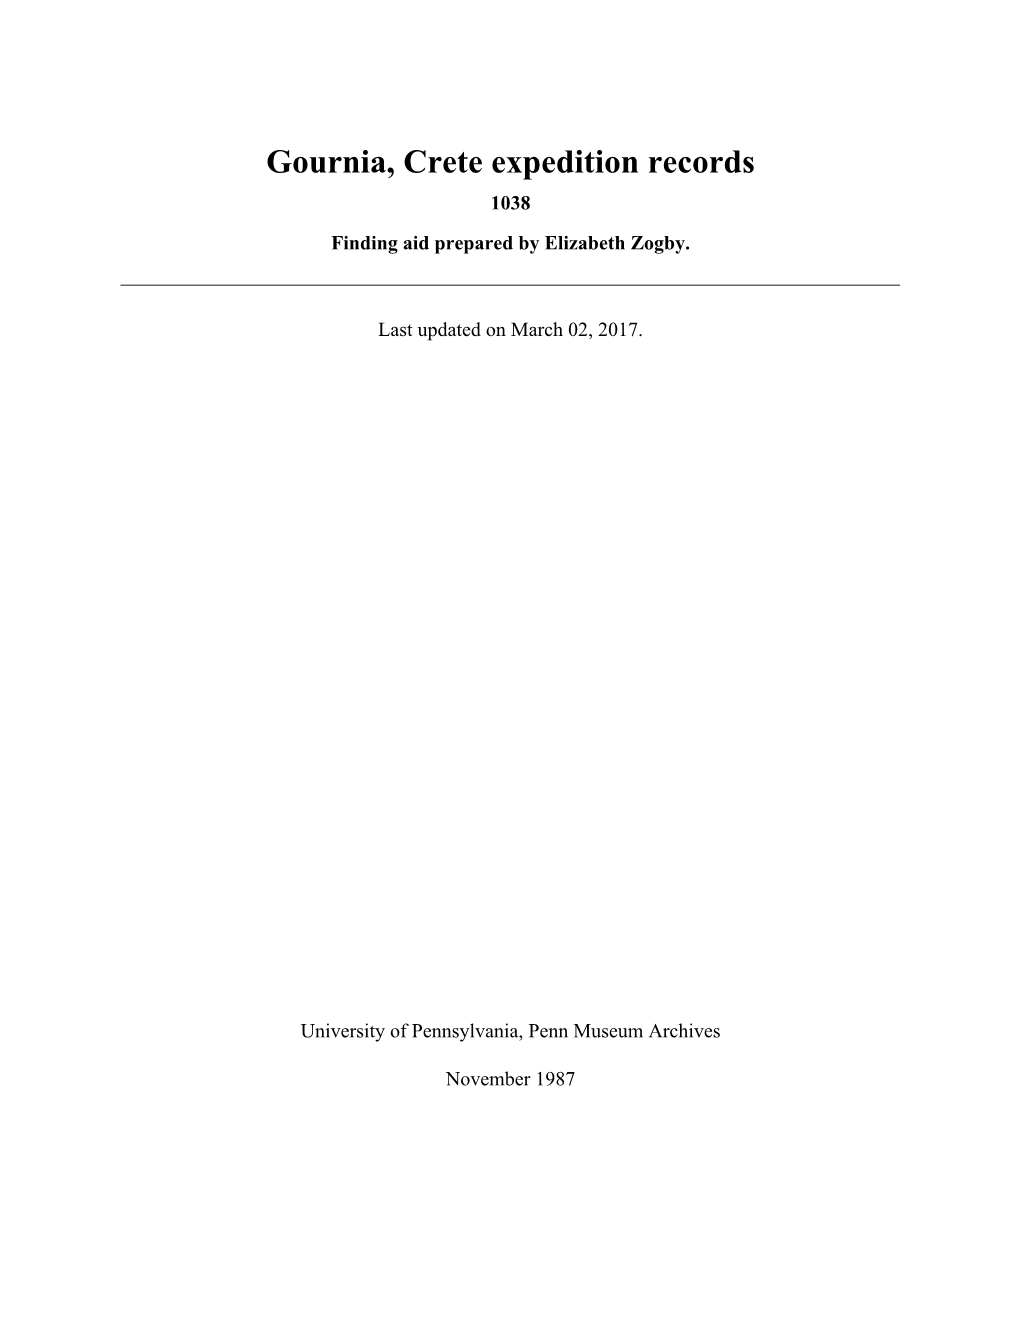 Gournia, Crete Expedition Records 1038 Finding Aid Prepared by Elizabeth Zogby